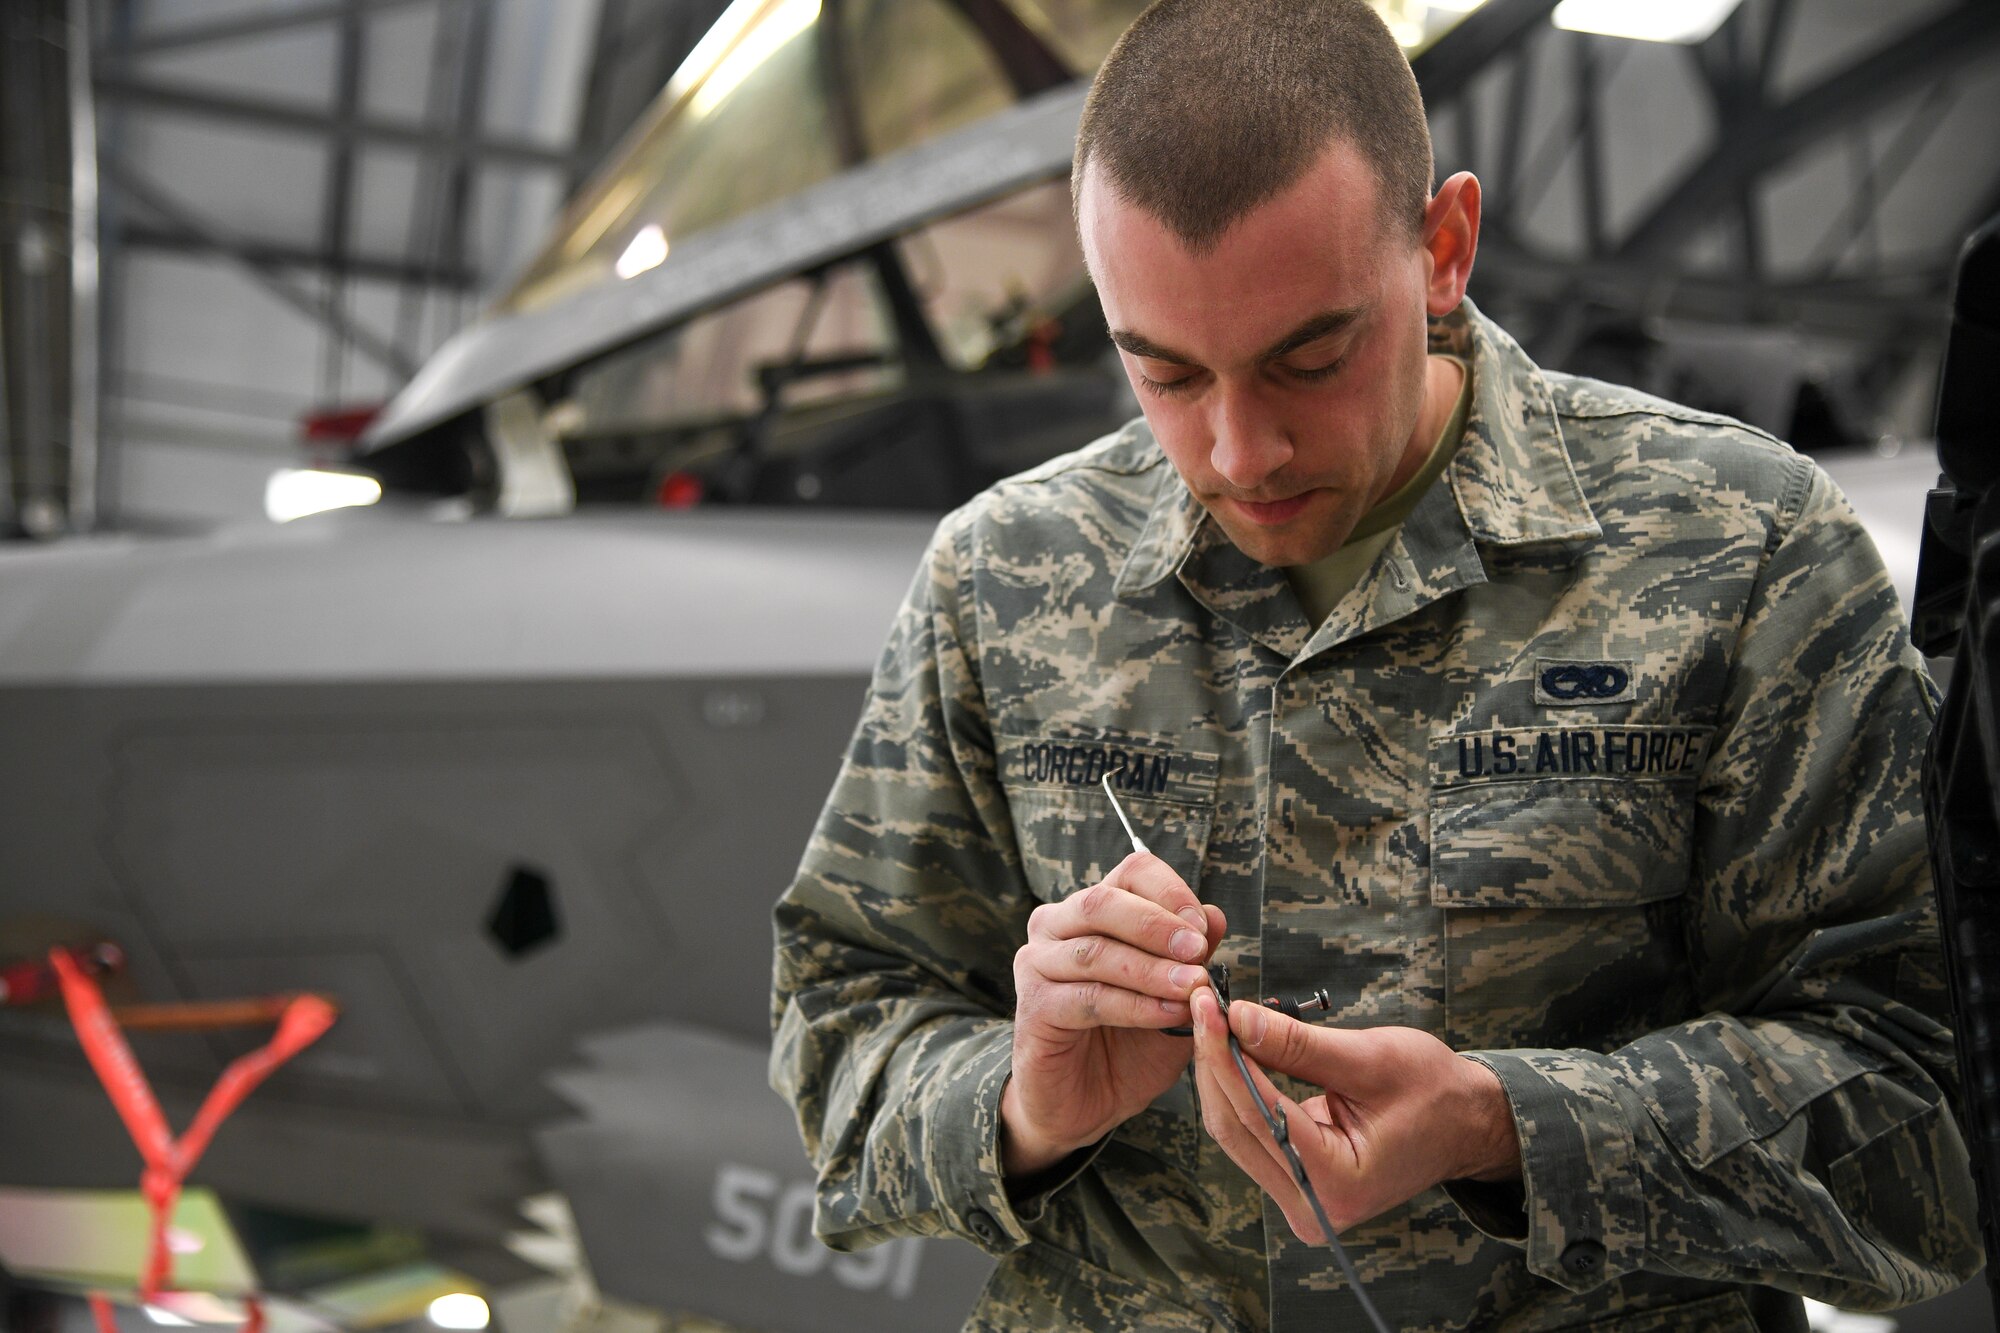 An Airman preps material for work on an F-35A canopy.